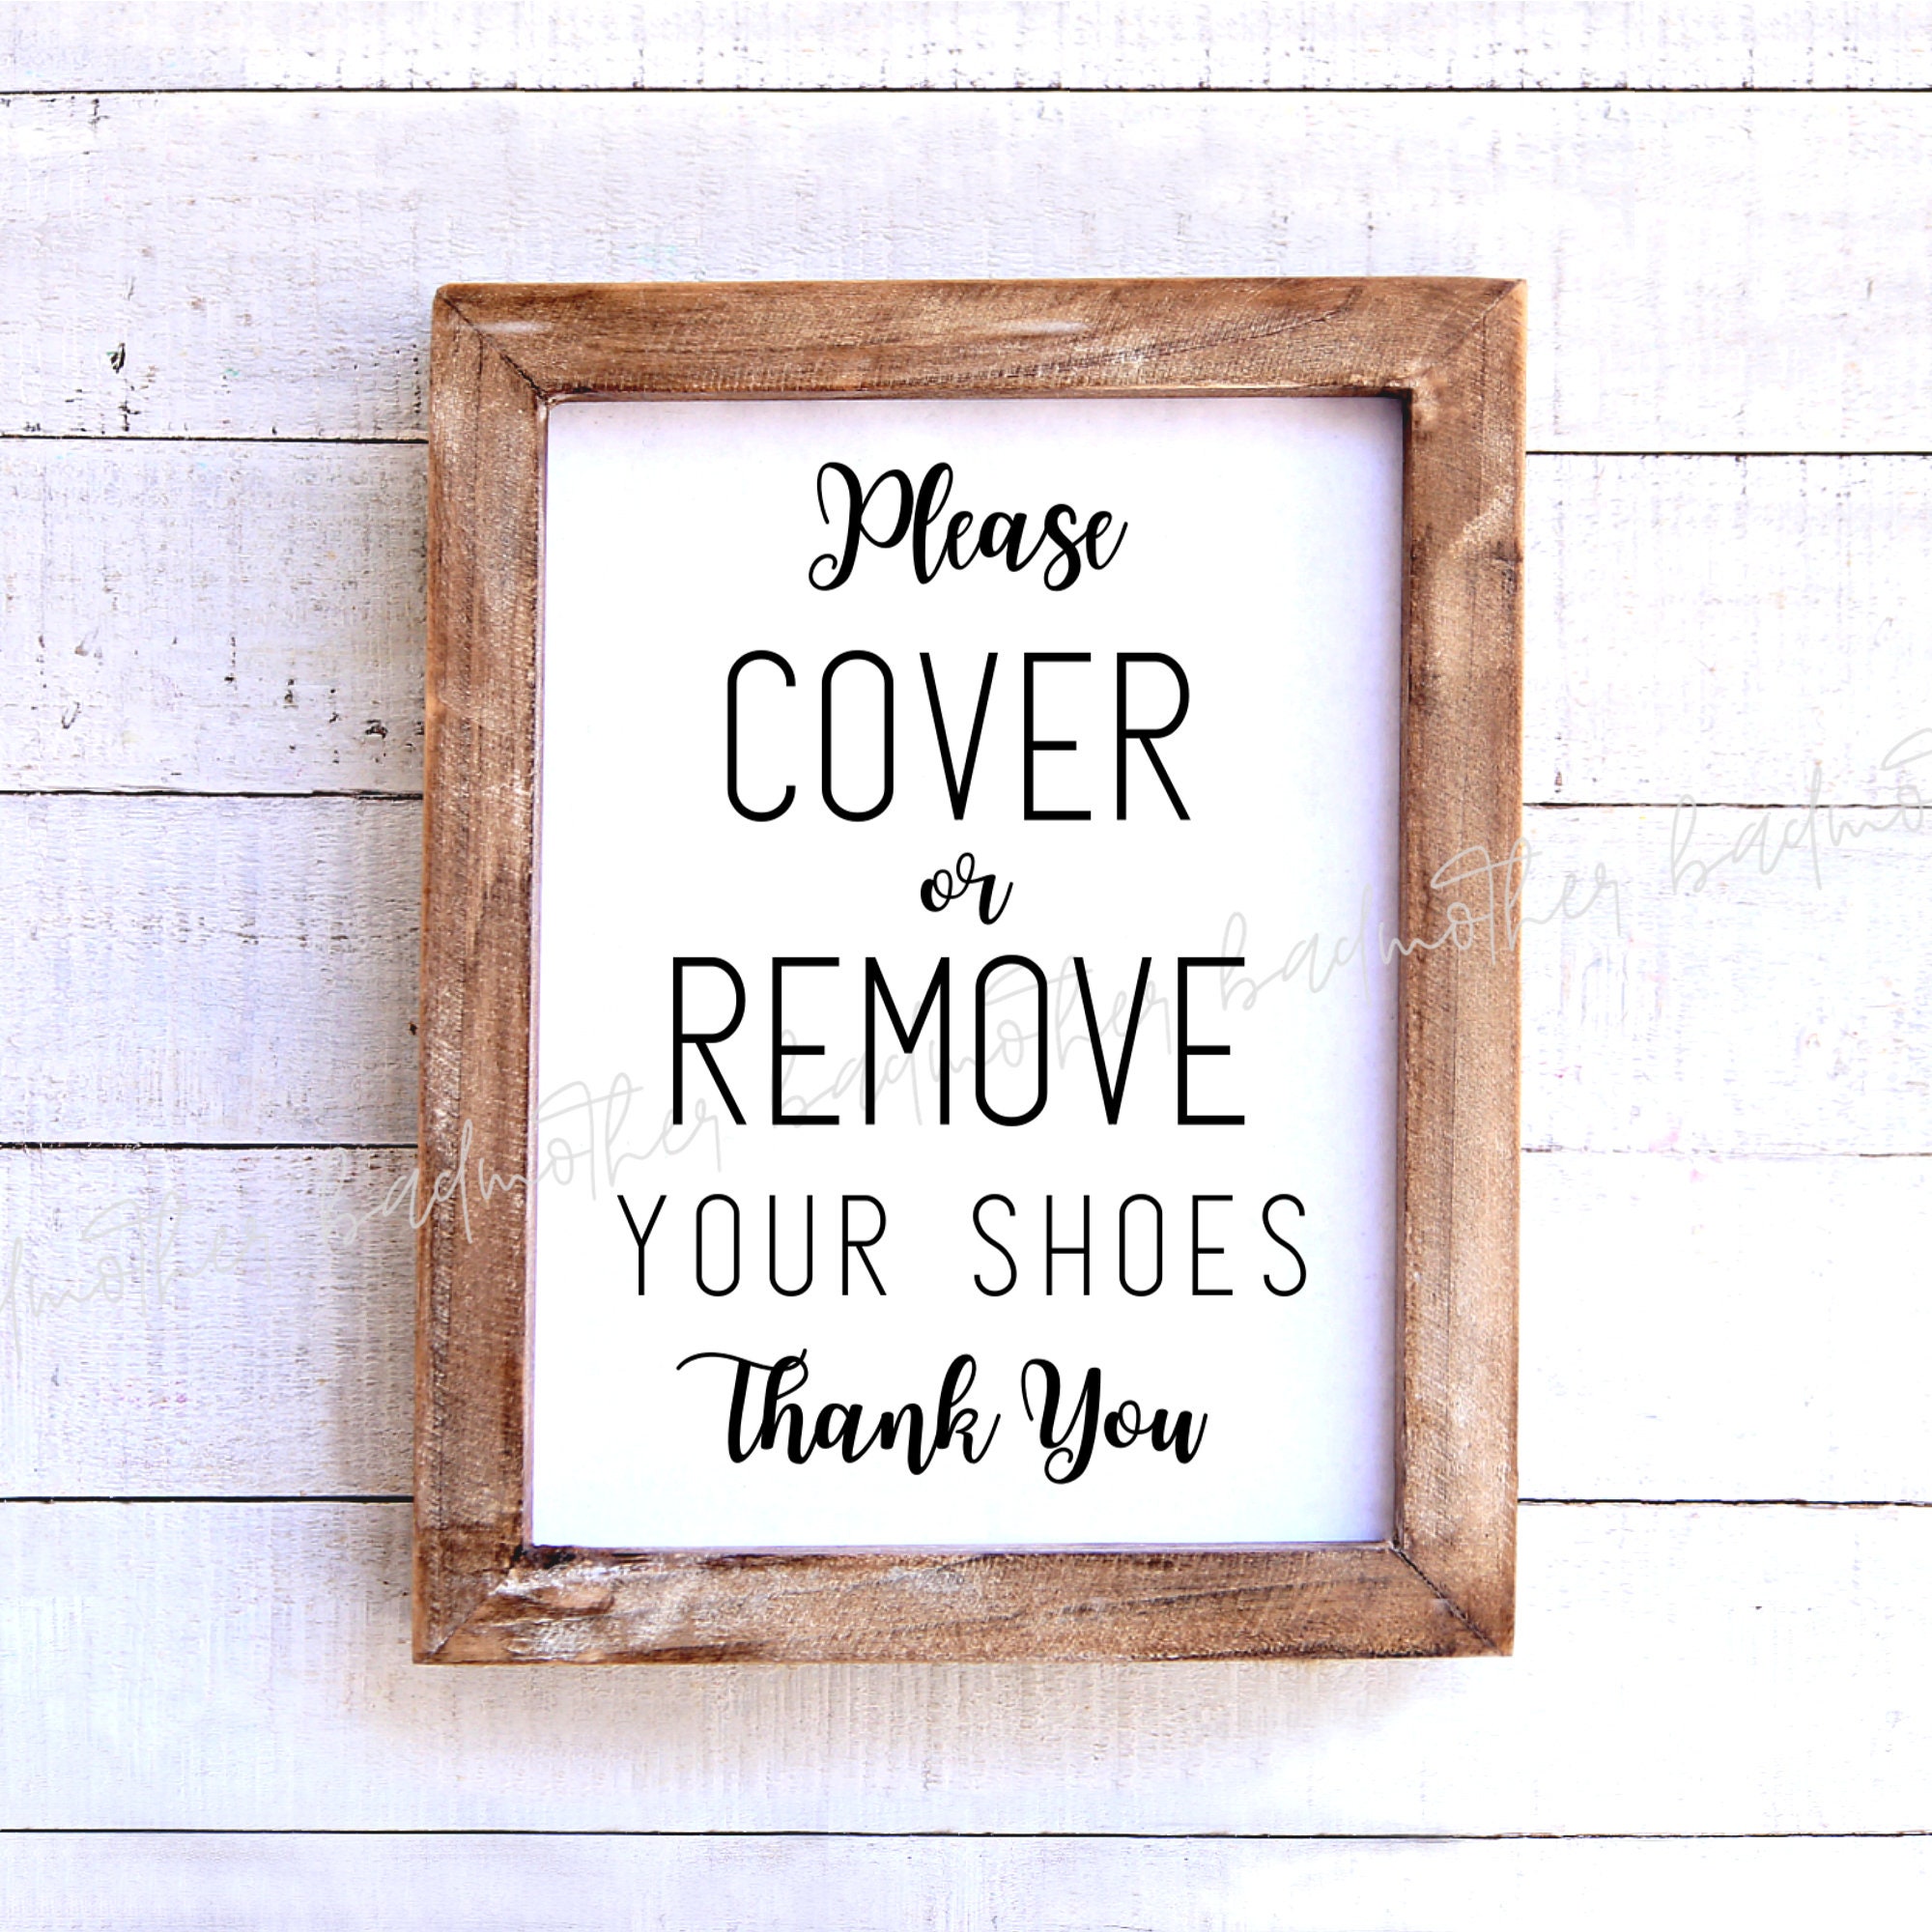 Please Remove Your Shoes Sign 8x10 Printable Stickhealthcare co uk